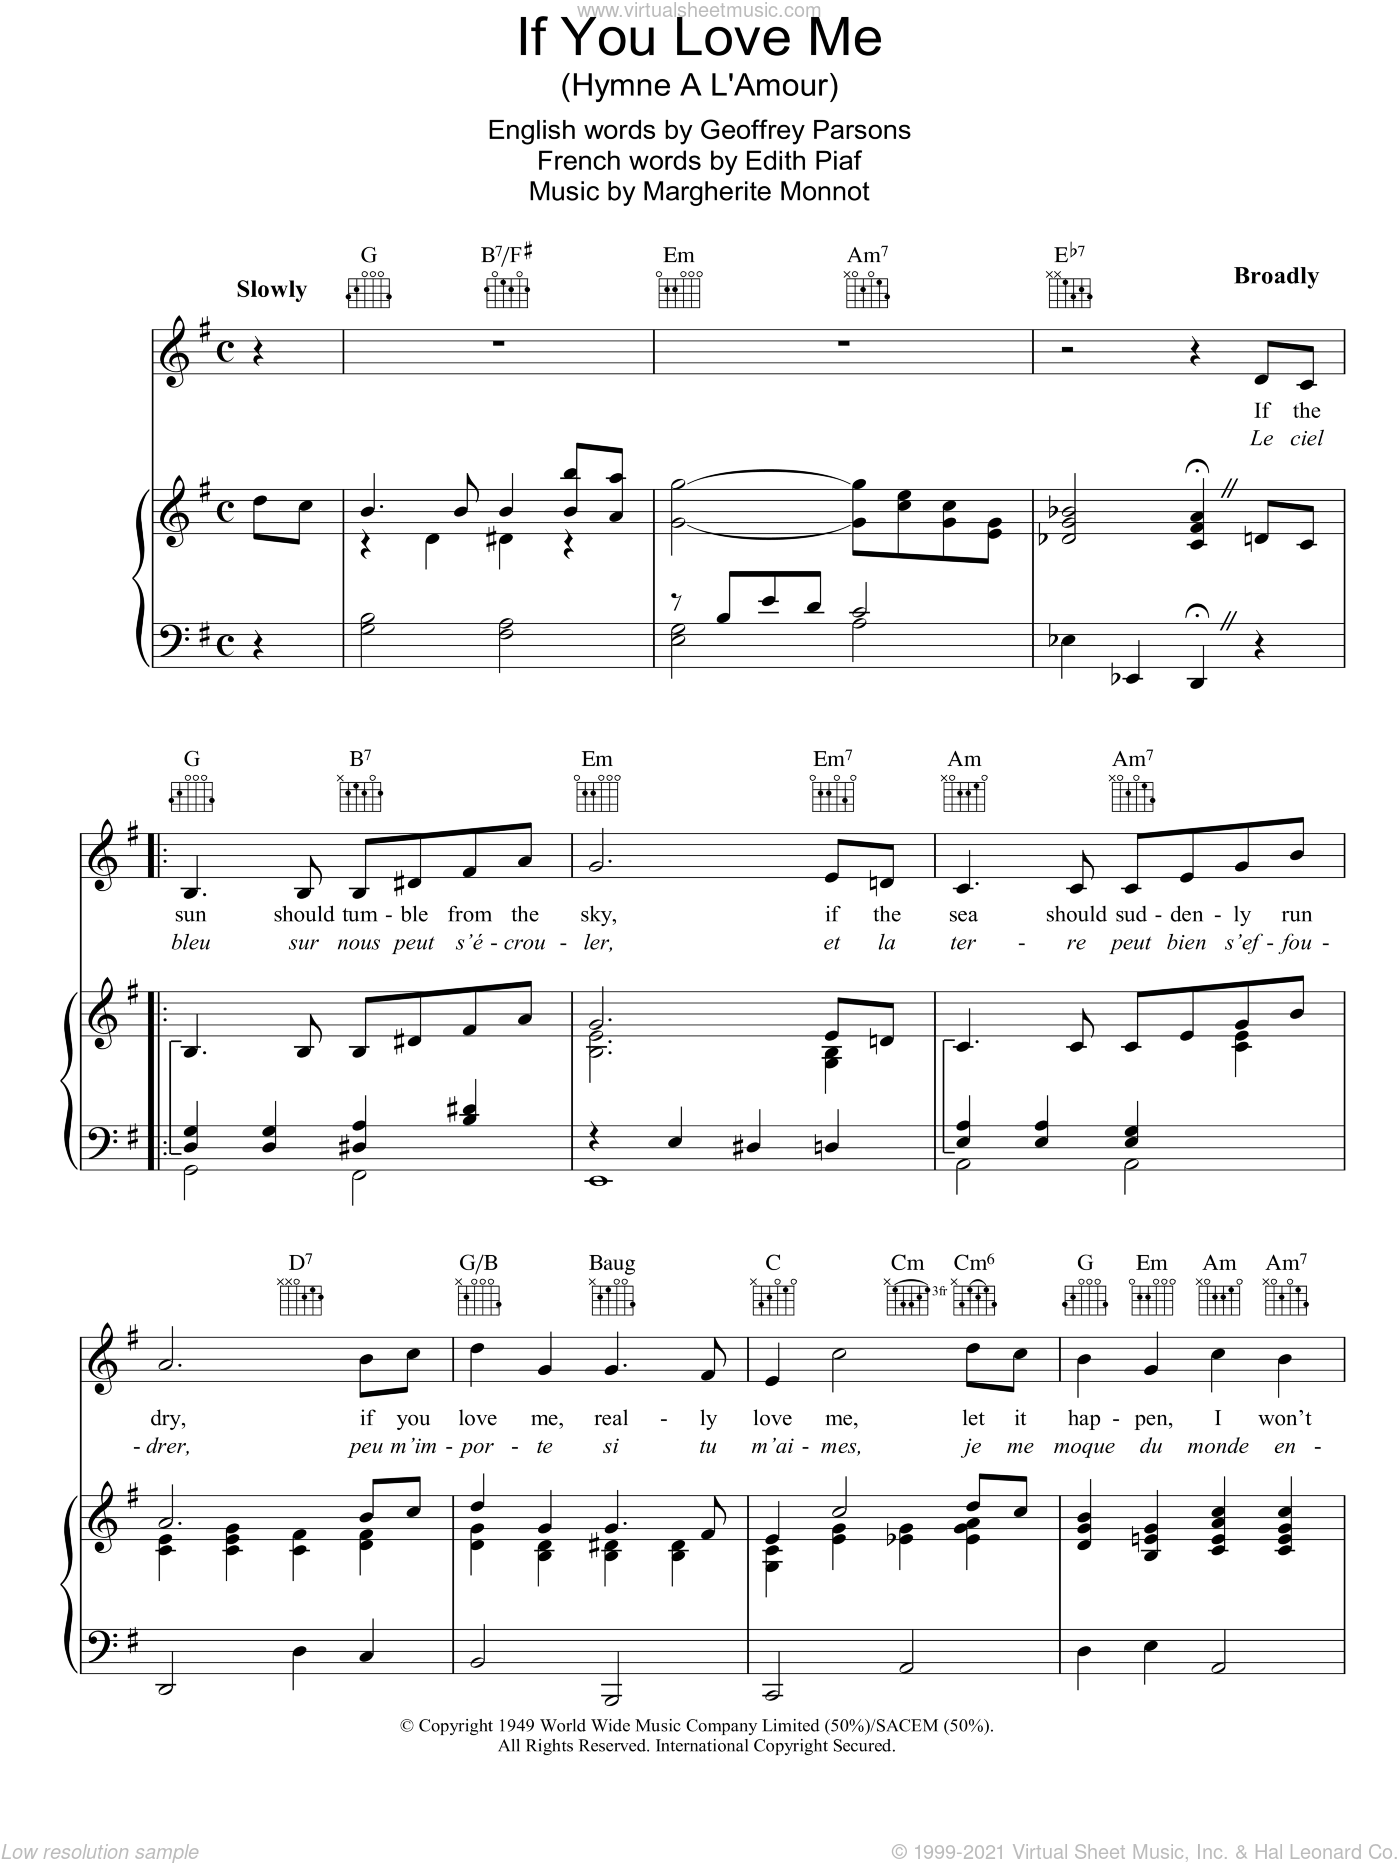 Piaf If You Love Me I Won T Care Hymne A L Amour Sheet Music For Voice Piano Or Guitar